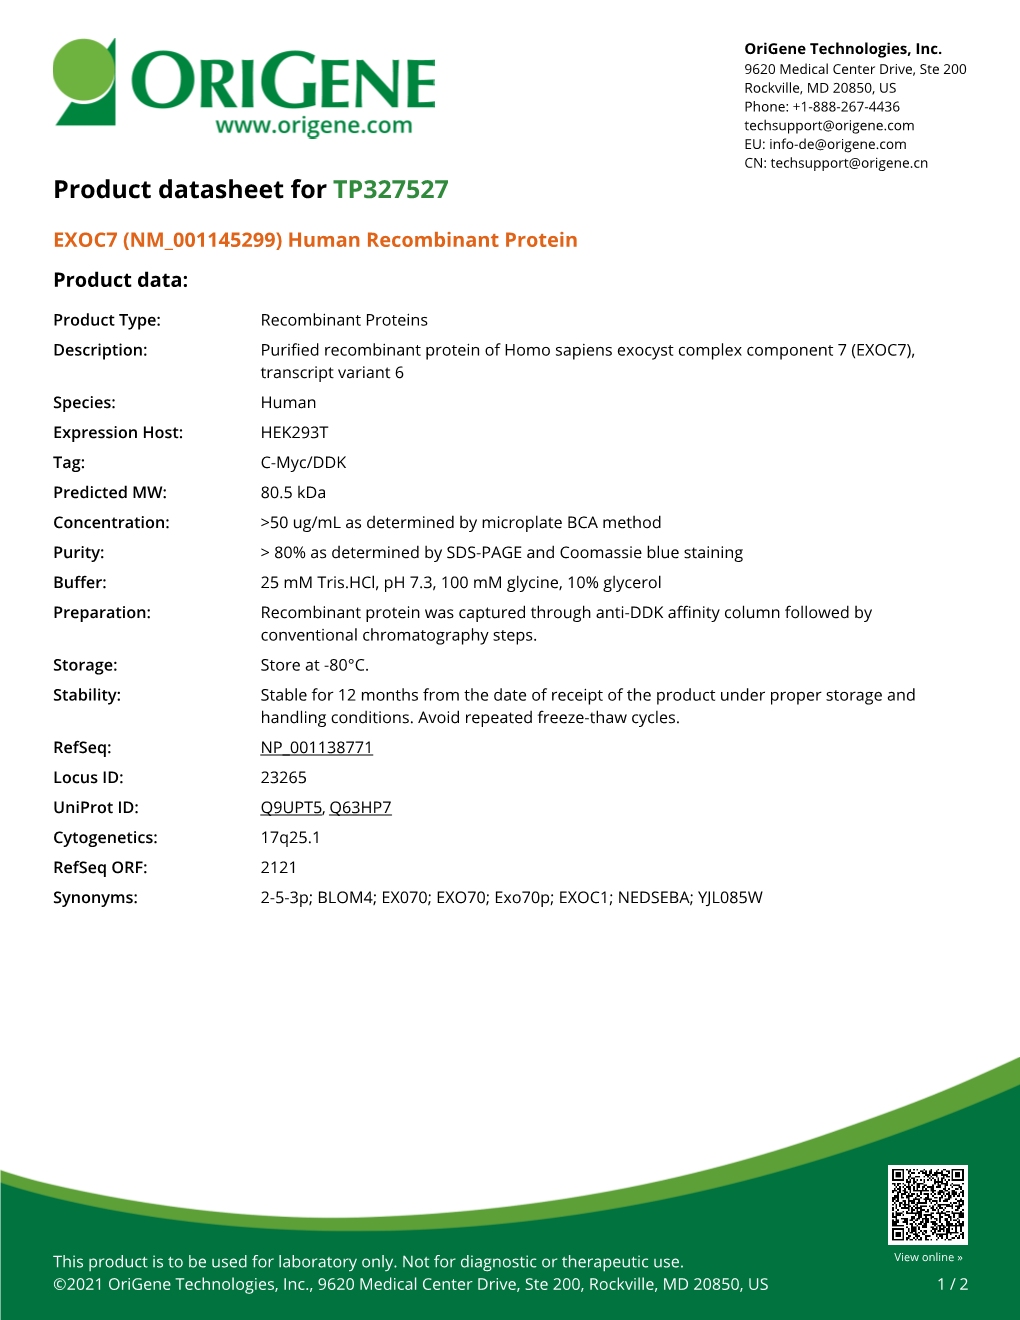 EXOC7 (NM 001145299) Human Recombinant Protein Product Data